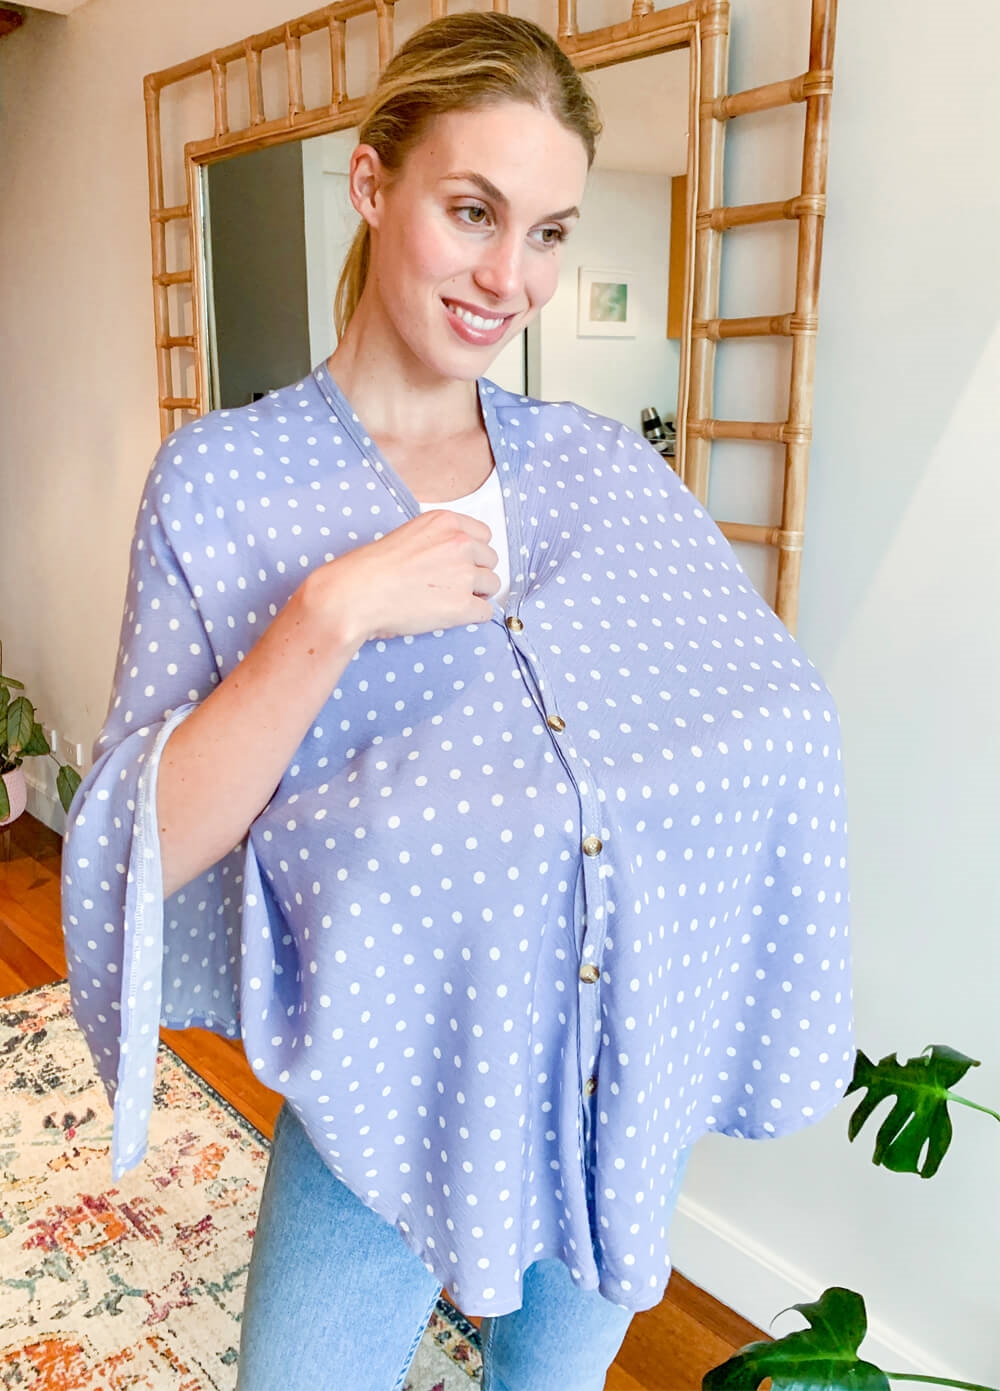 Lait & Co - Nursing Couverture in Blue Polkadot | Queen Bee